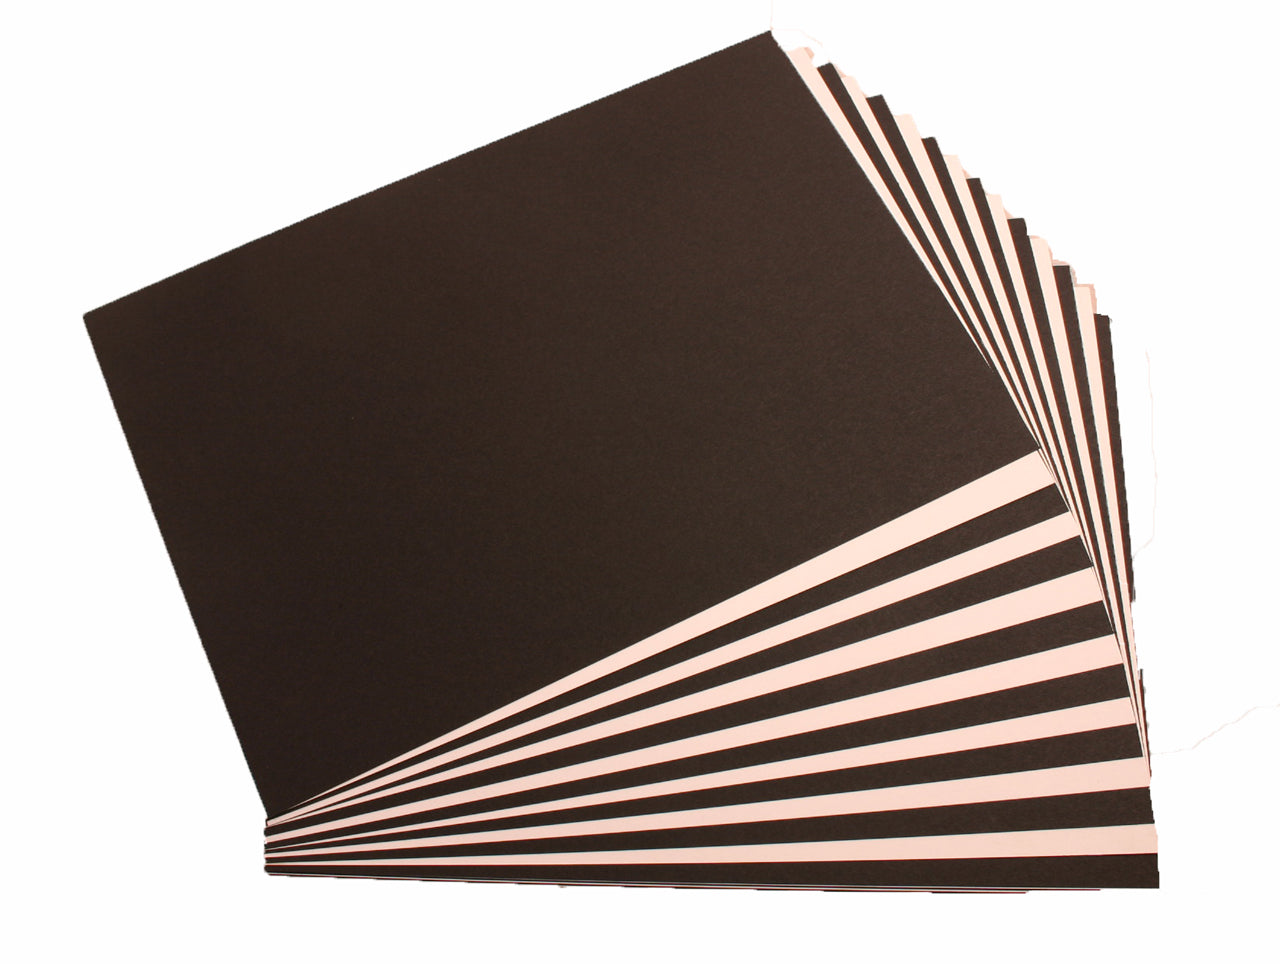 Sheets of alternating Black and White card